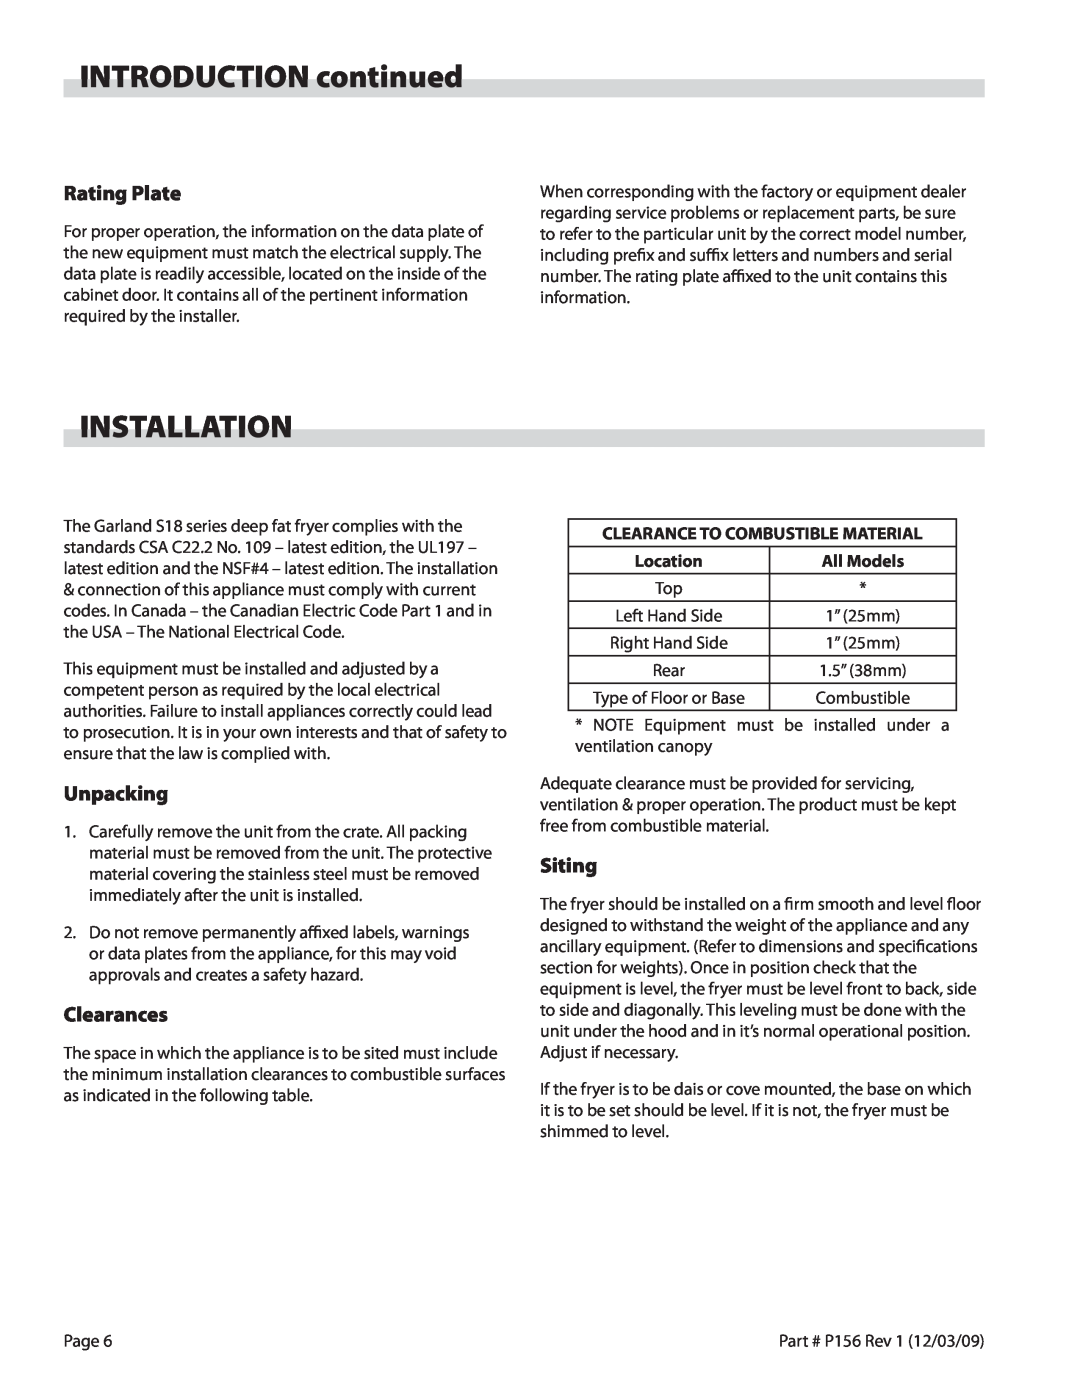 Garland S18-FS installation instructions INTRODUCTION continued, Installation, Rating Plate, Unpacking, Clearances, Siting 